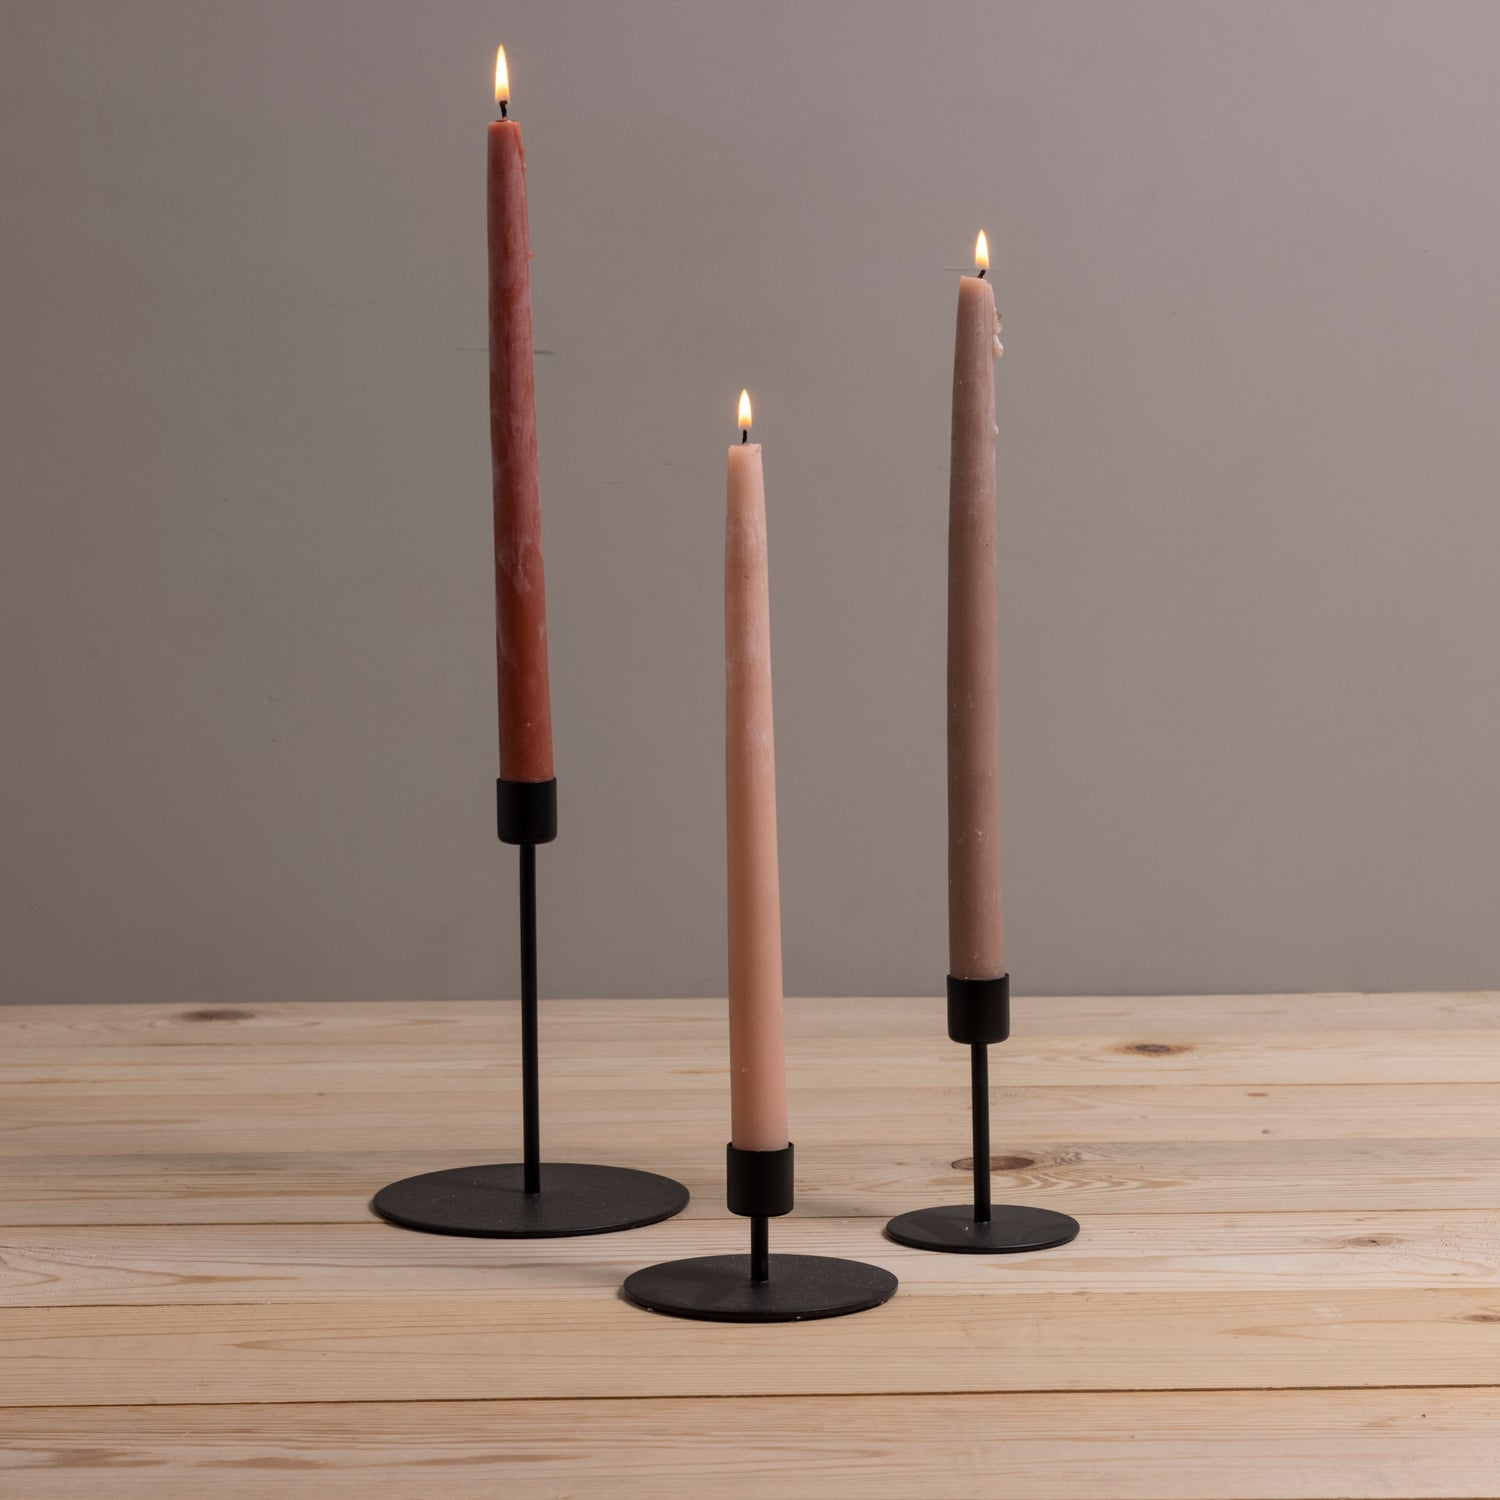 Kent Black Taper Candle Holder, Tall